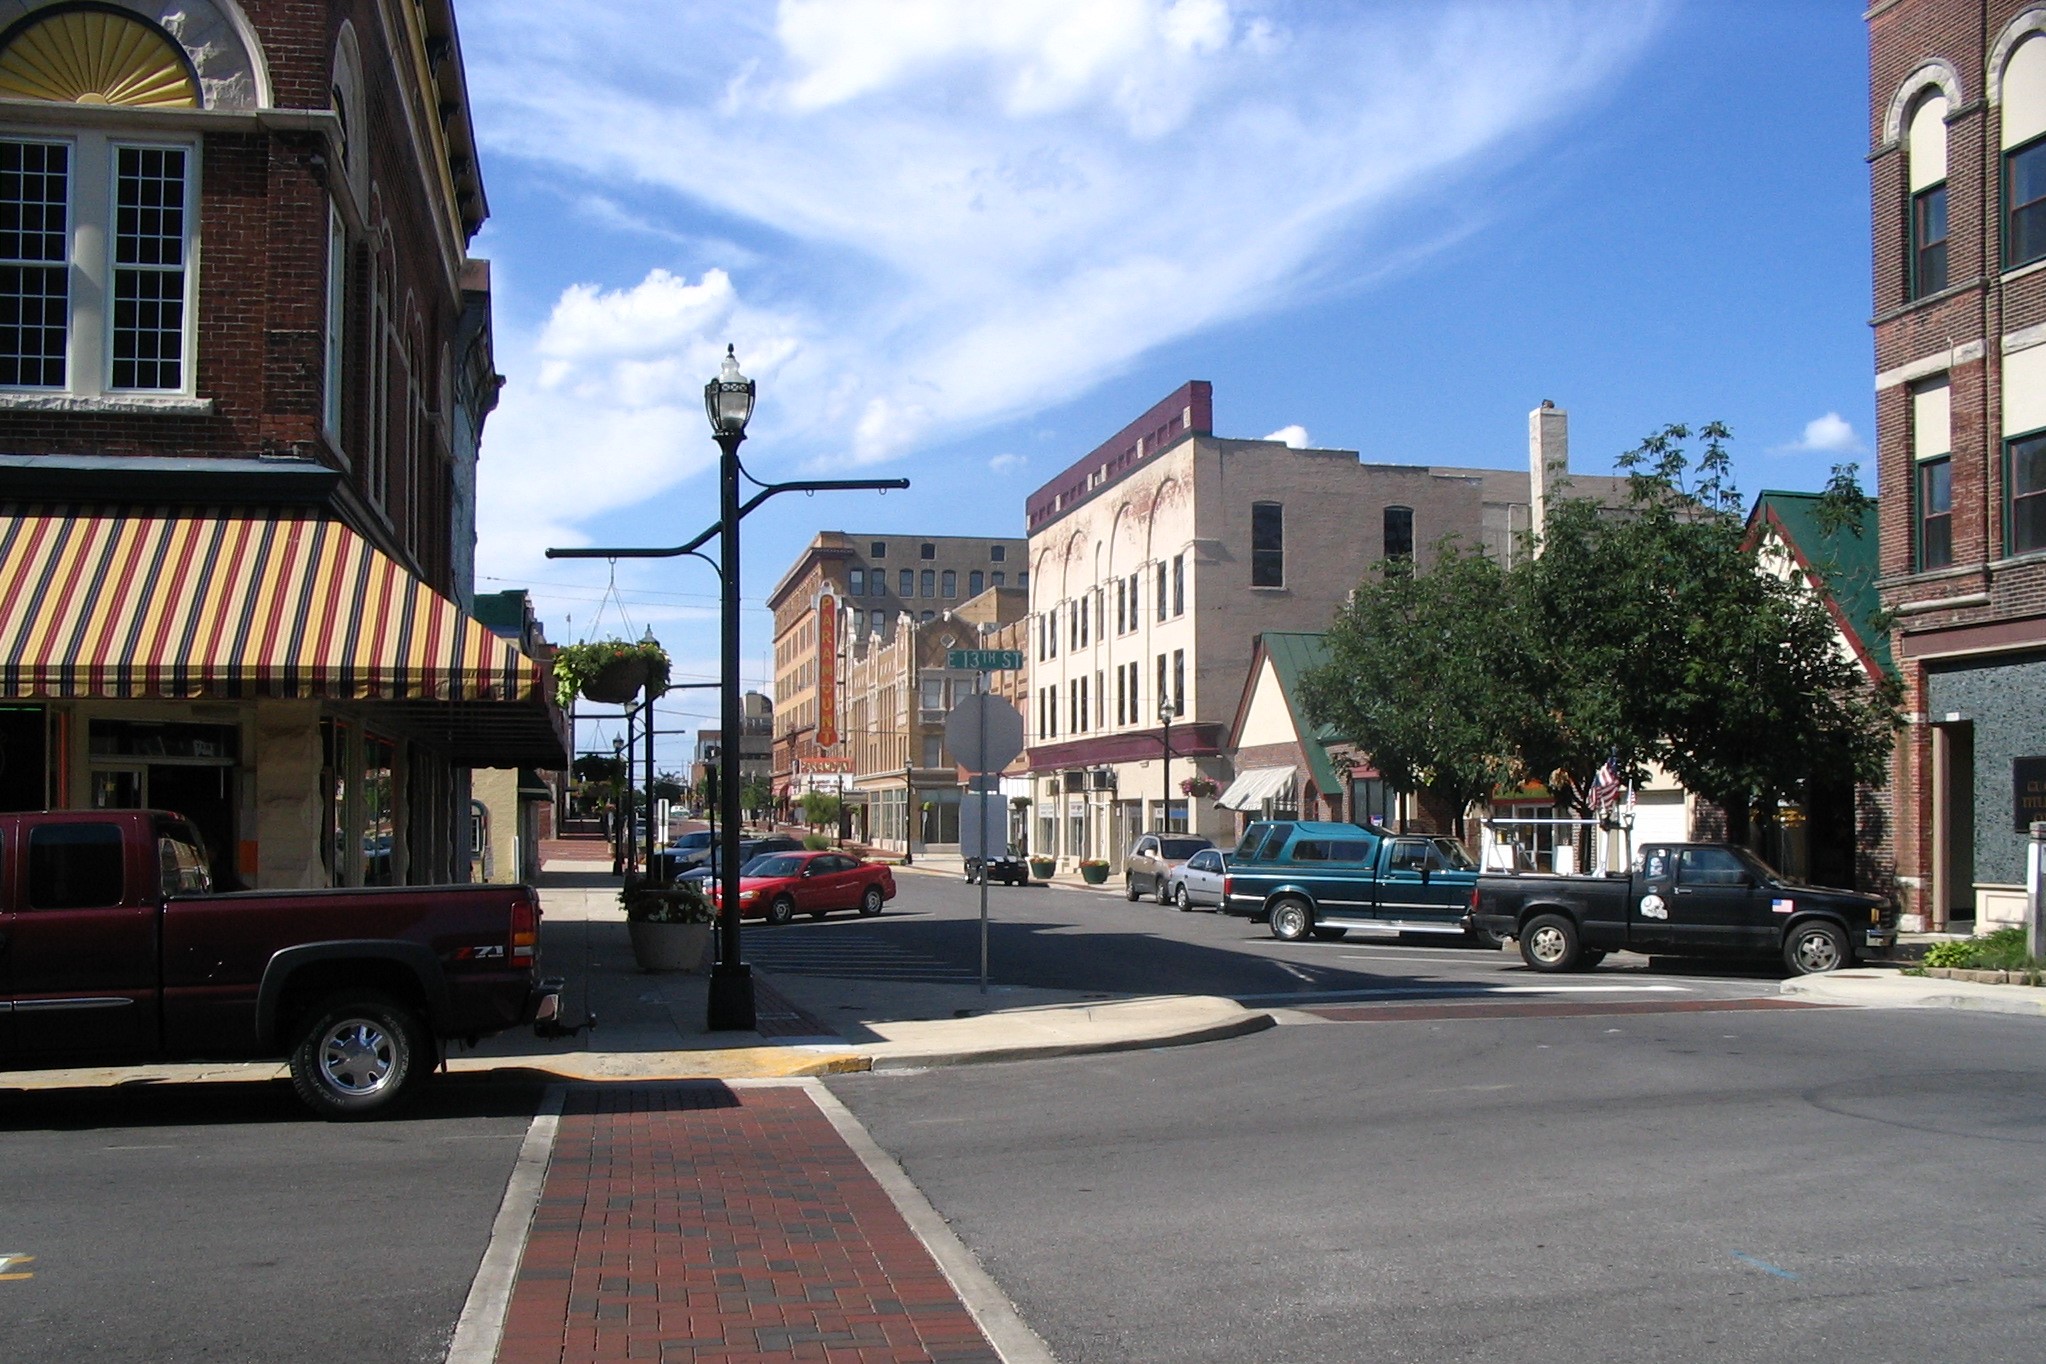 Downtown Anderson, Indiana.